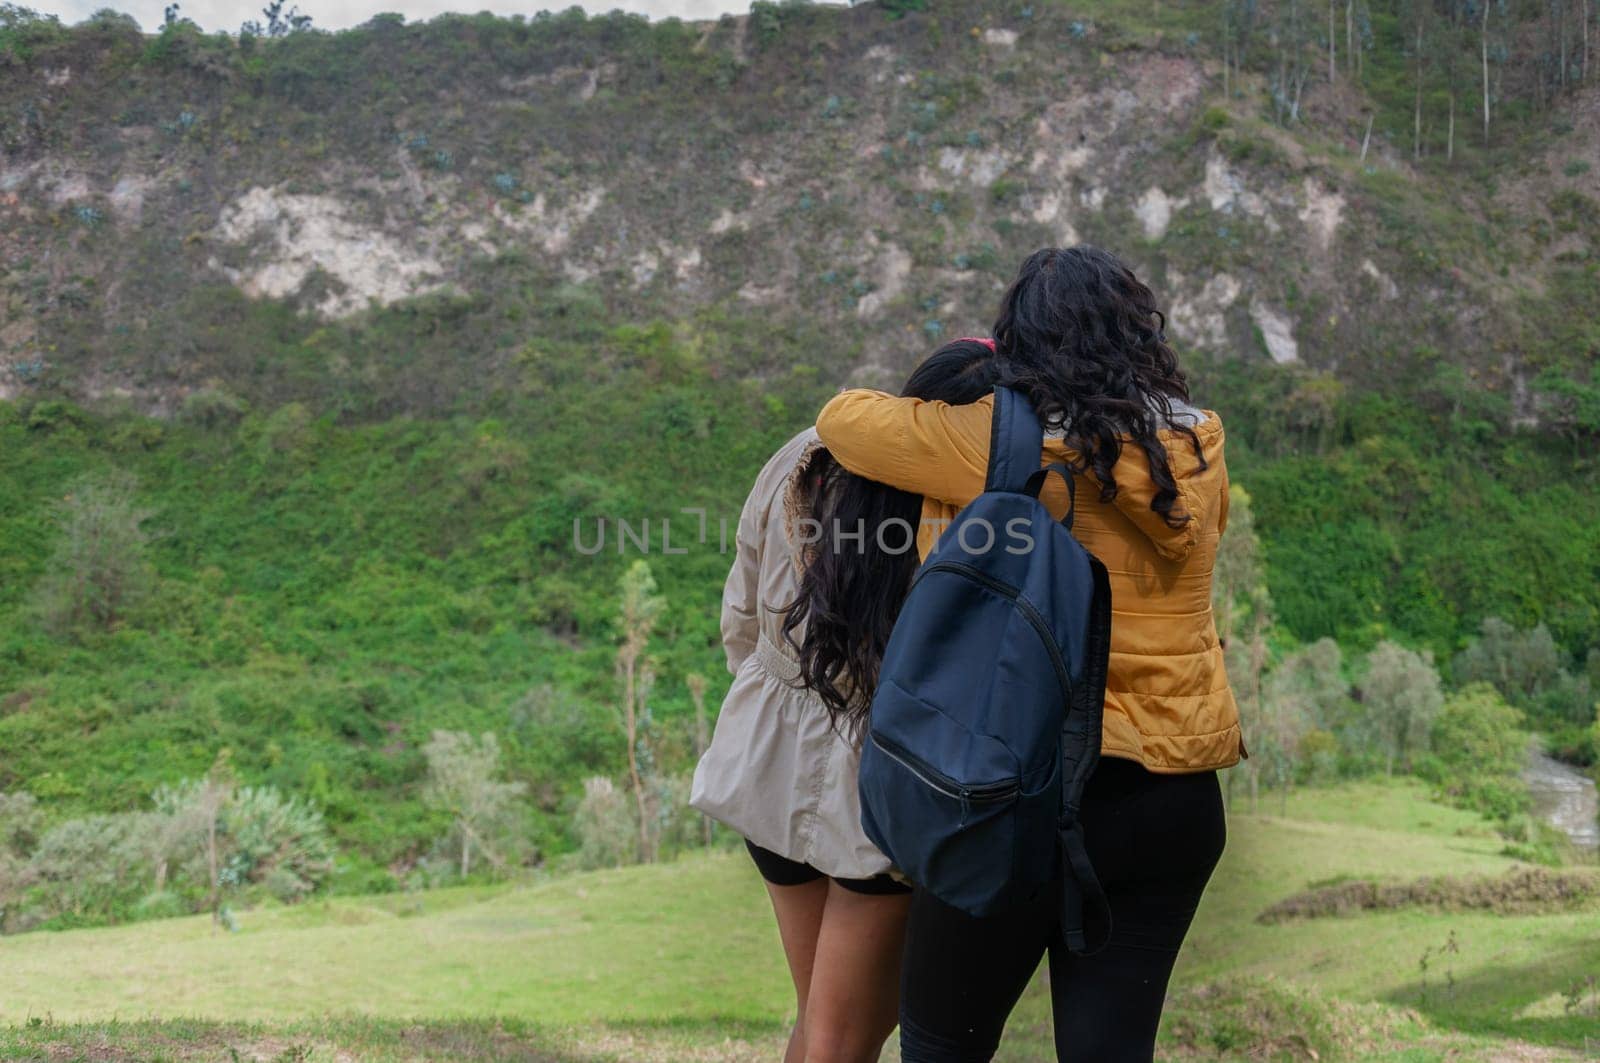 two girls hugging each other, demonstrating the love they feel for each other while breathing the pure mountain air. High quality photo